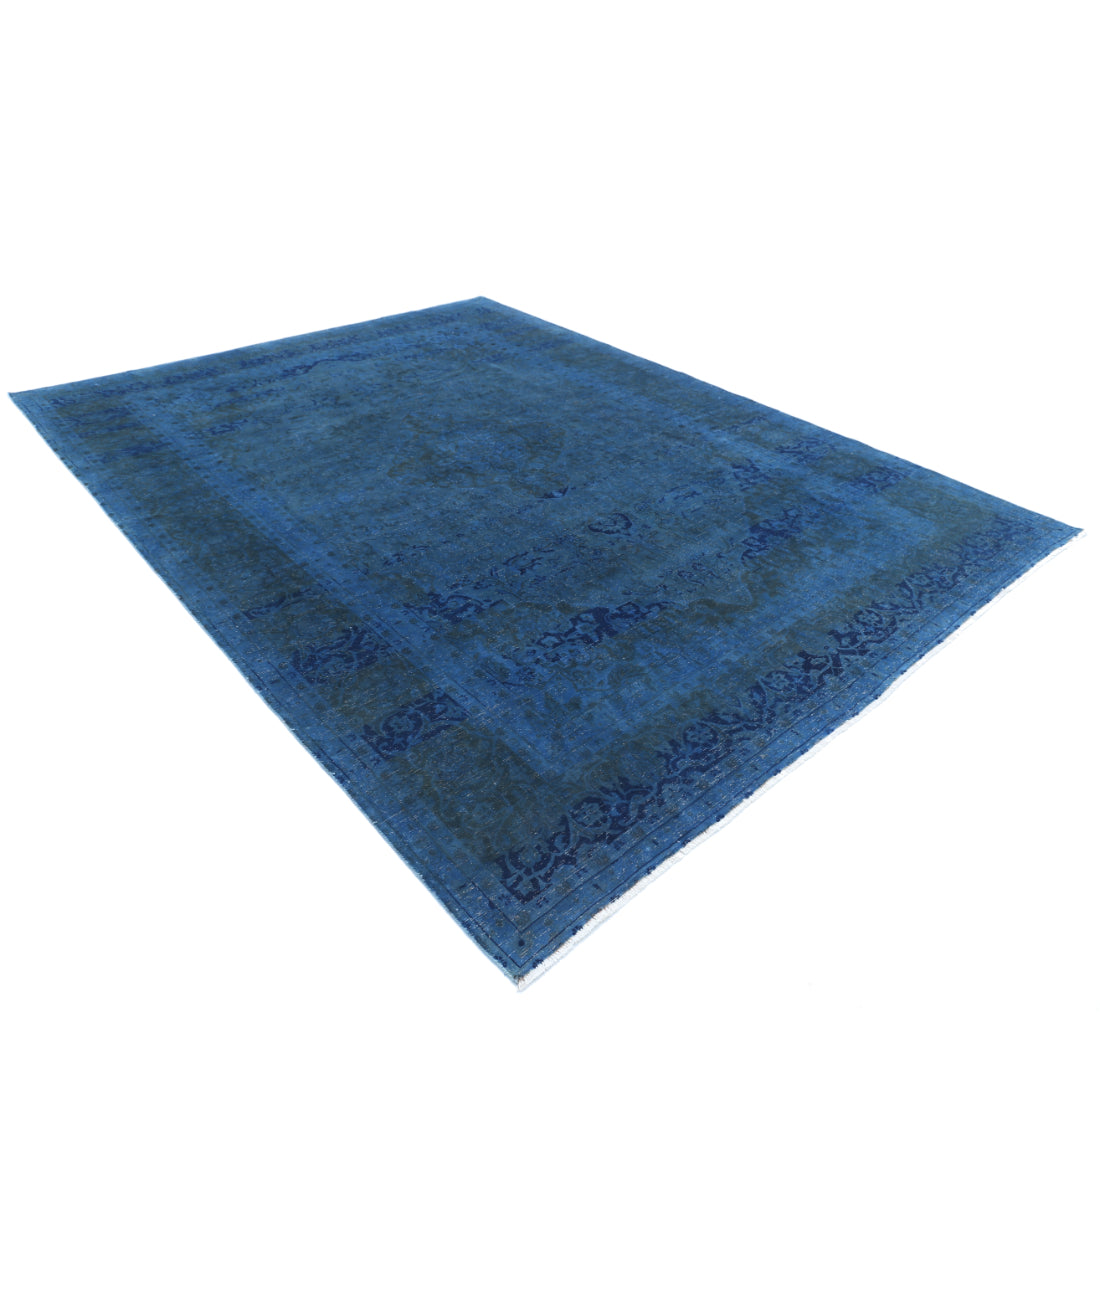 Hand Knotted Transitional Overdye Kashan Wool Rug - 8'2'' x 11'0'' 8'2'' x 11'0'' (245 X 330) / Blue / Blue